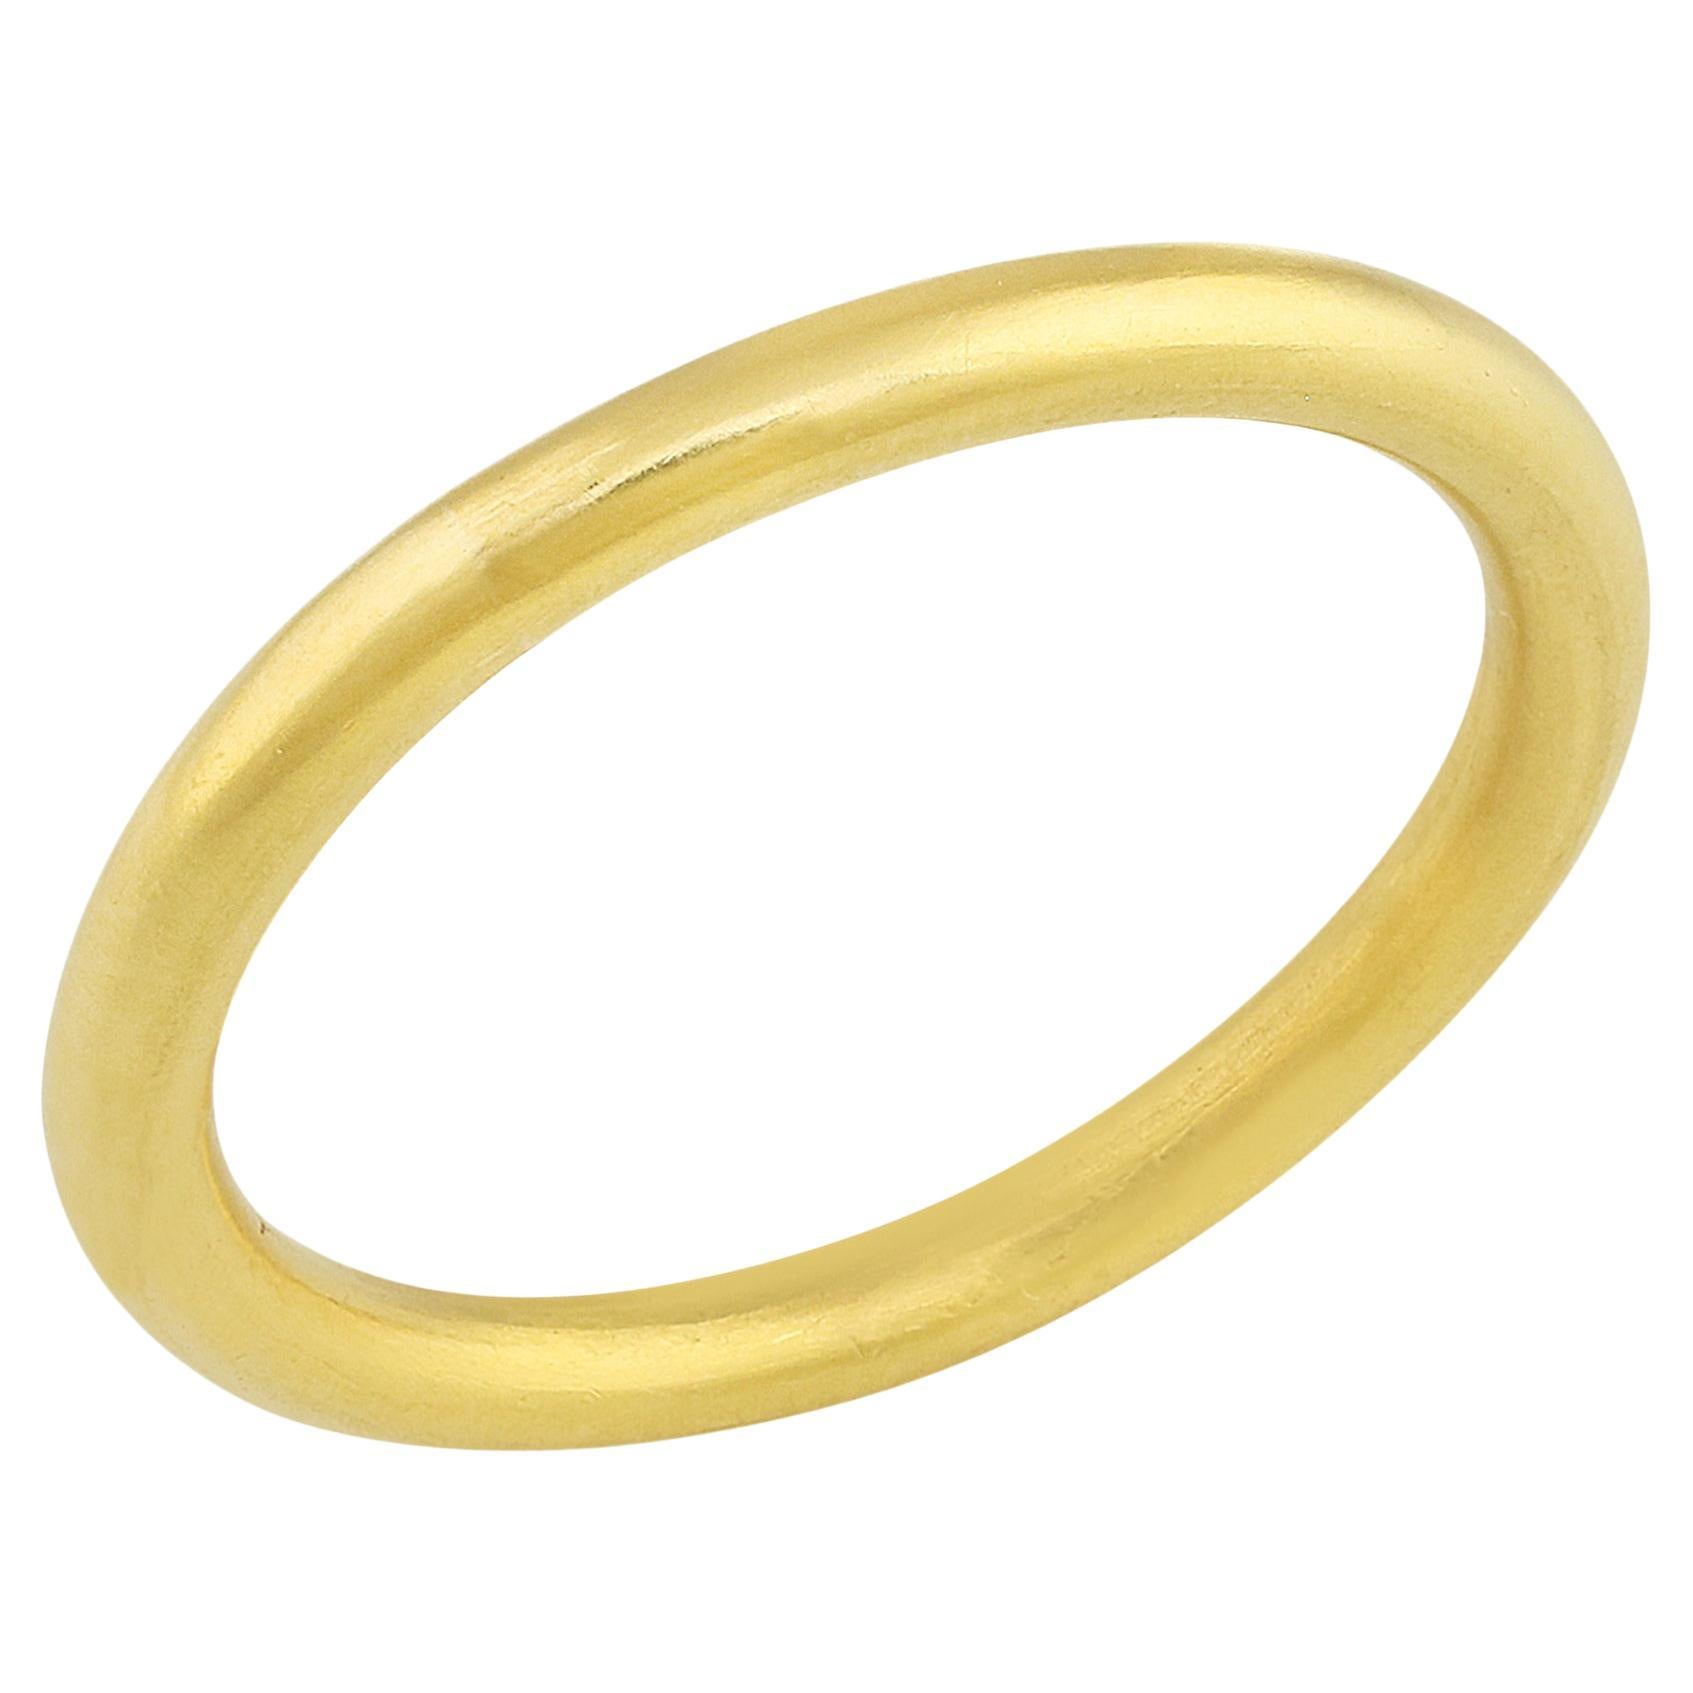 PHILIPPE SPENCER Solid 20K Gold Hand-Forged 2.3mm Organic Round Ring